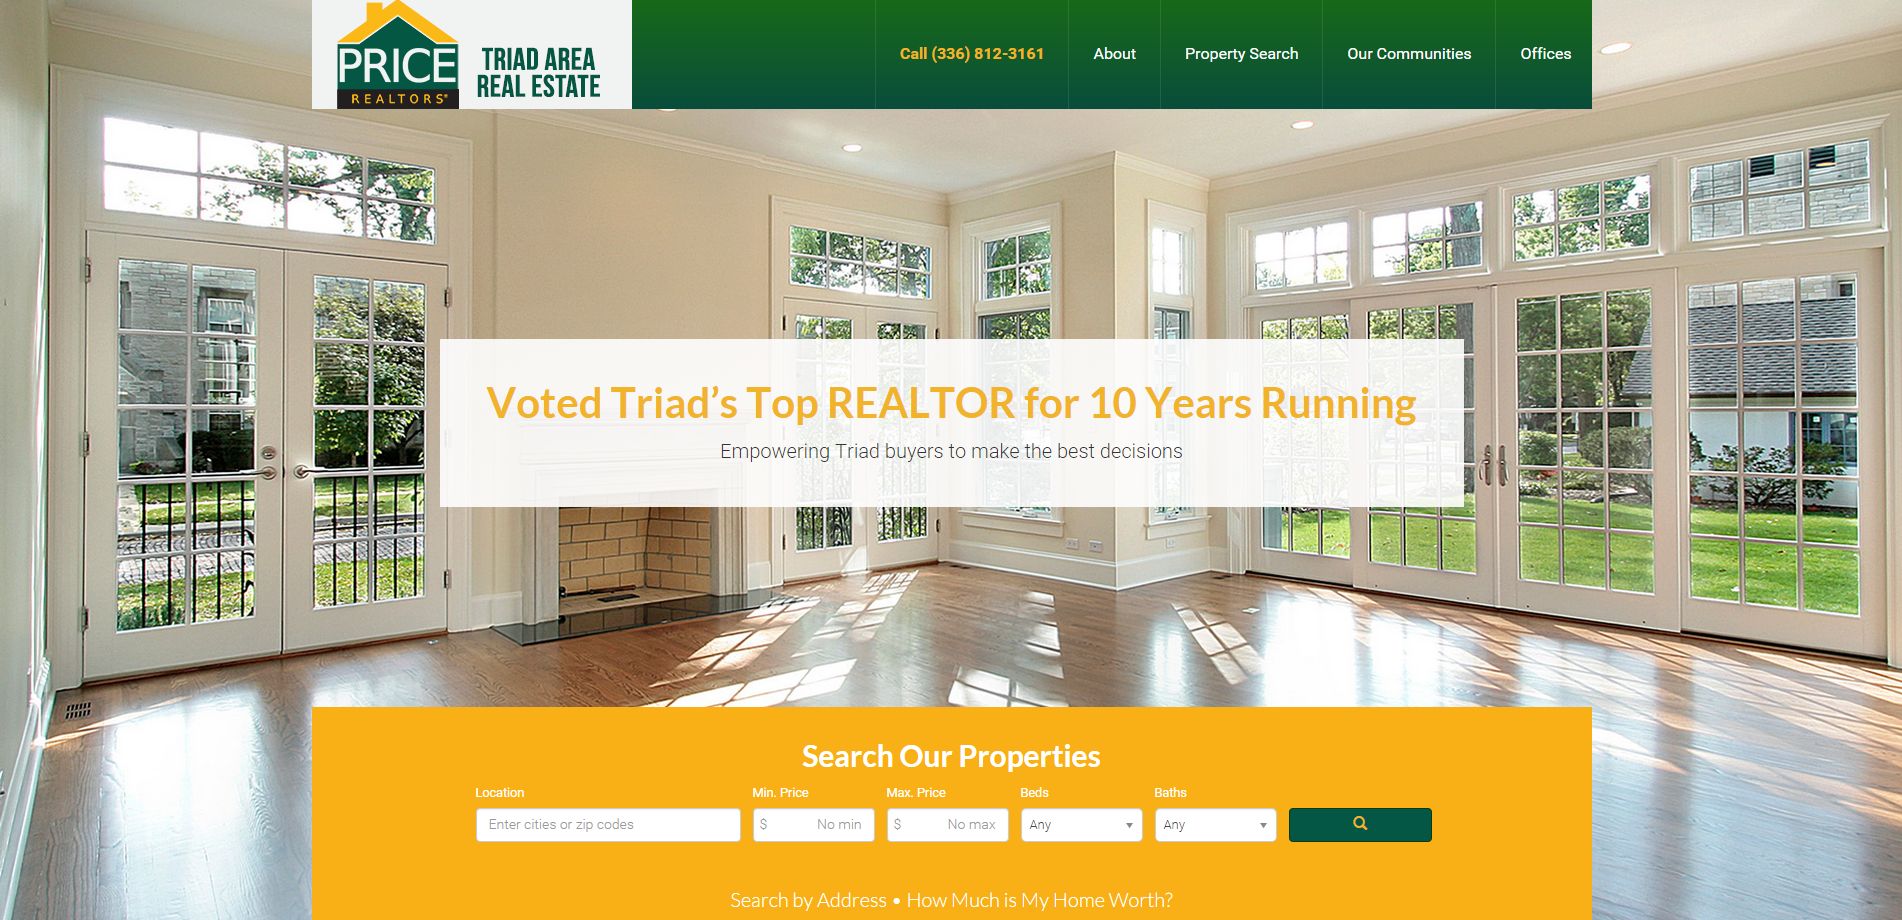 We created an innovative, user friendly and full-featured real estate website for Ed Price & Associates.